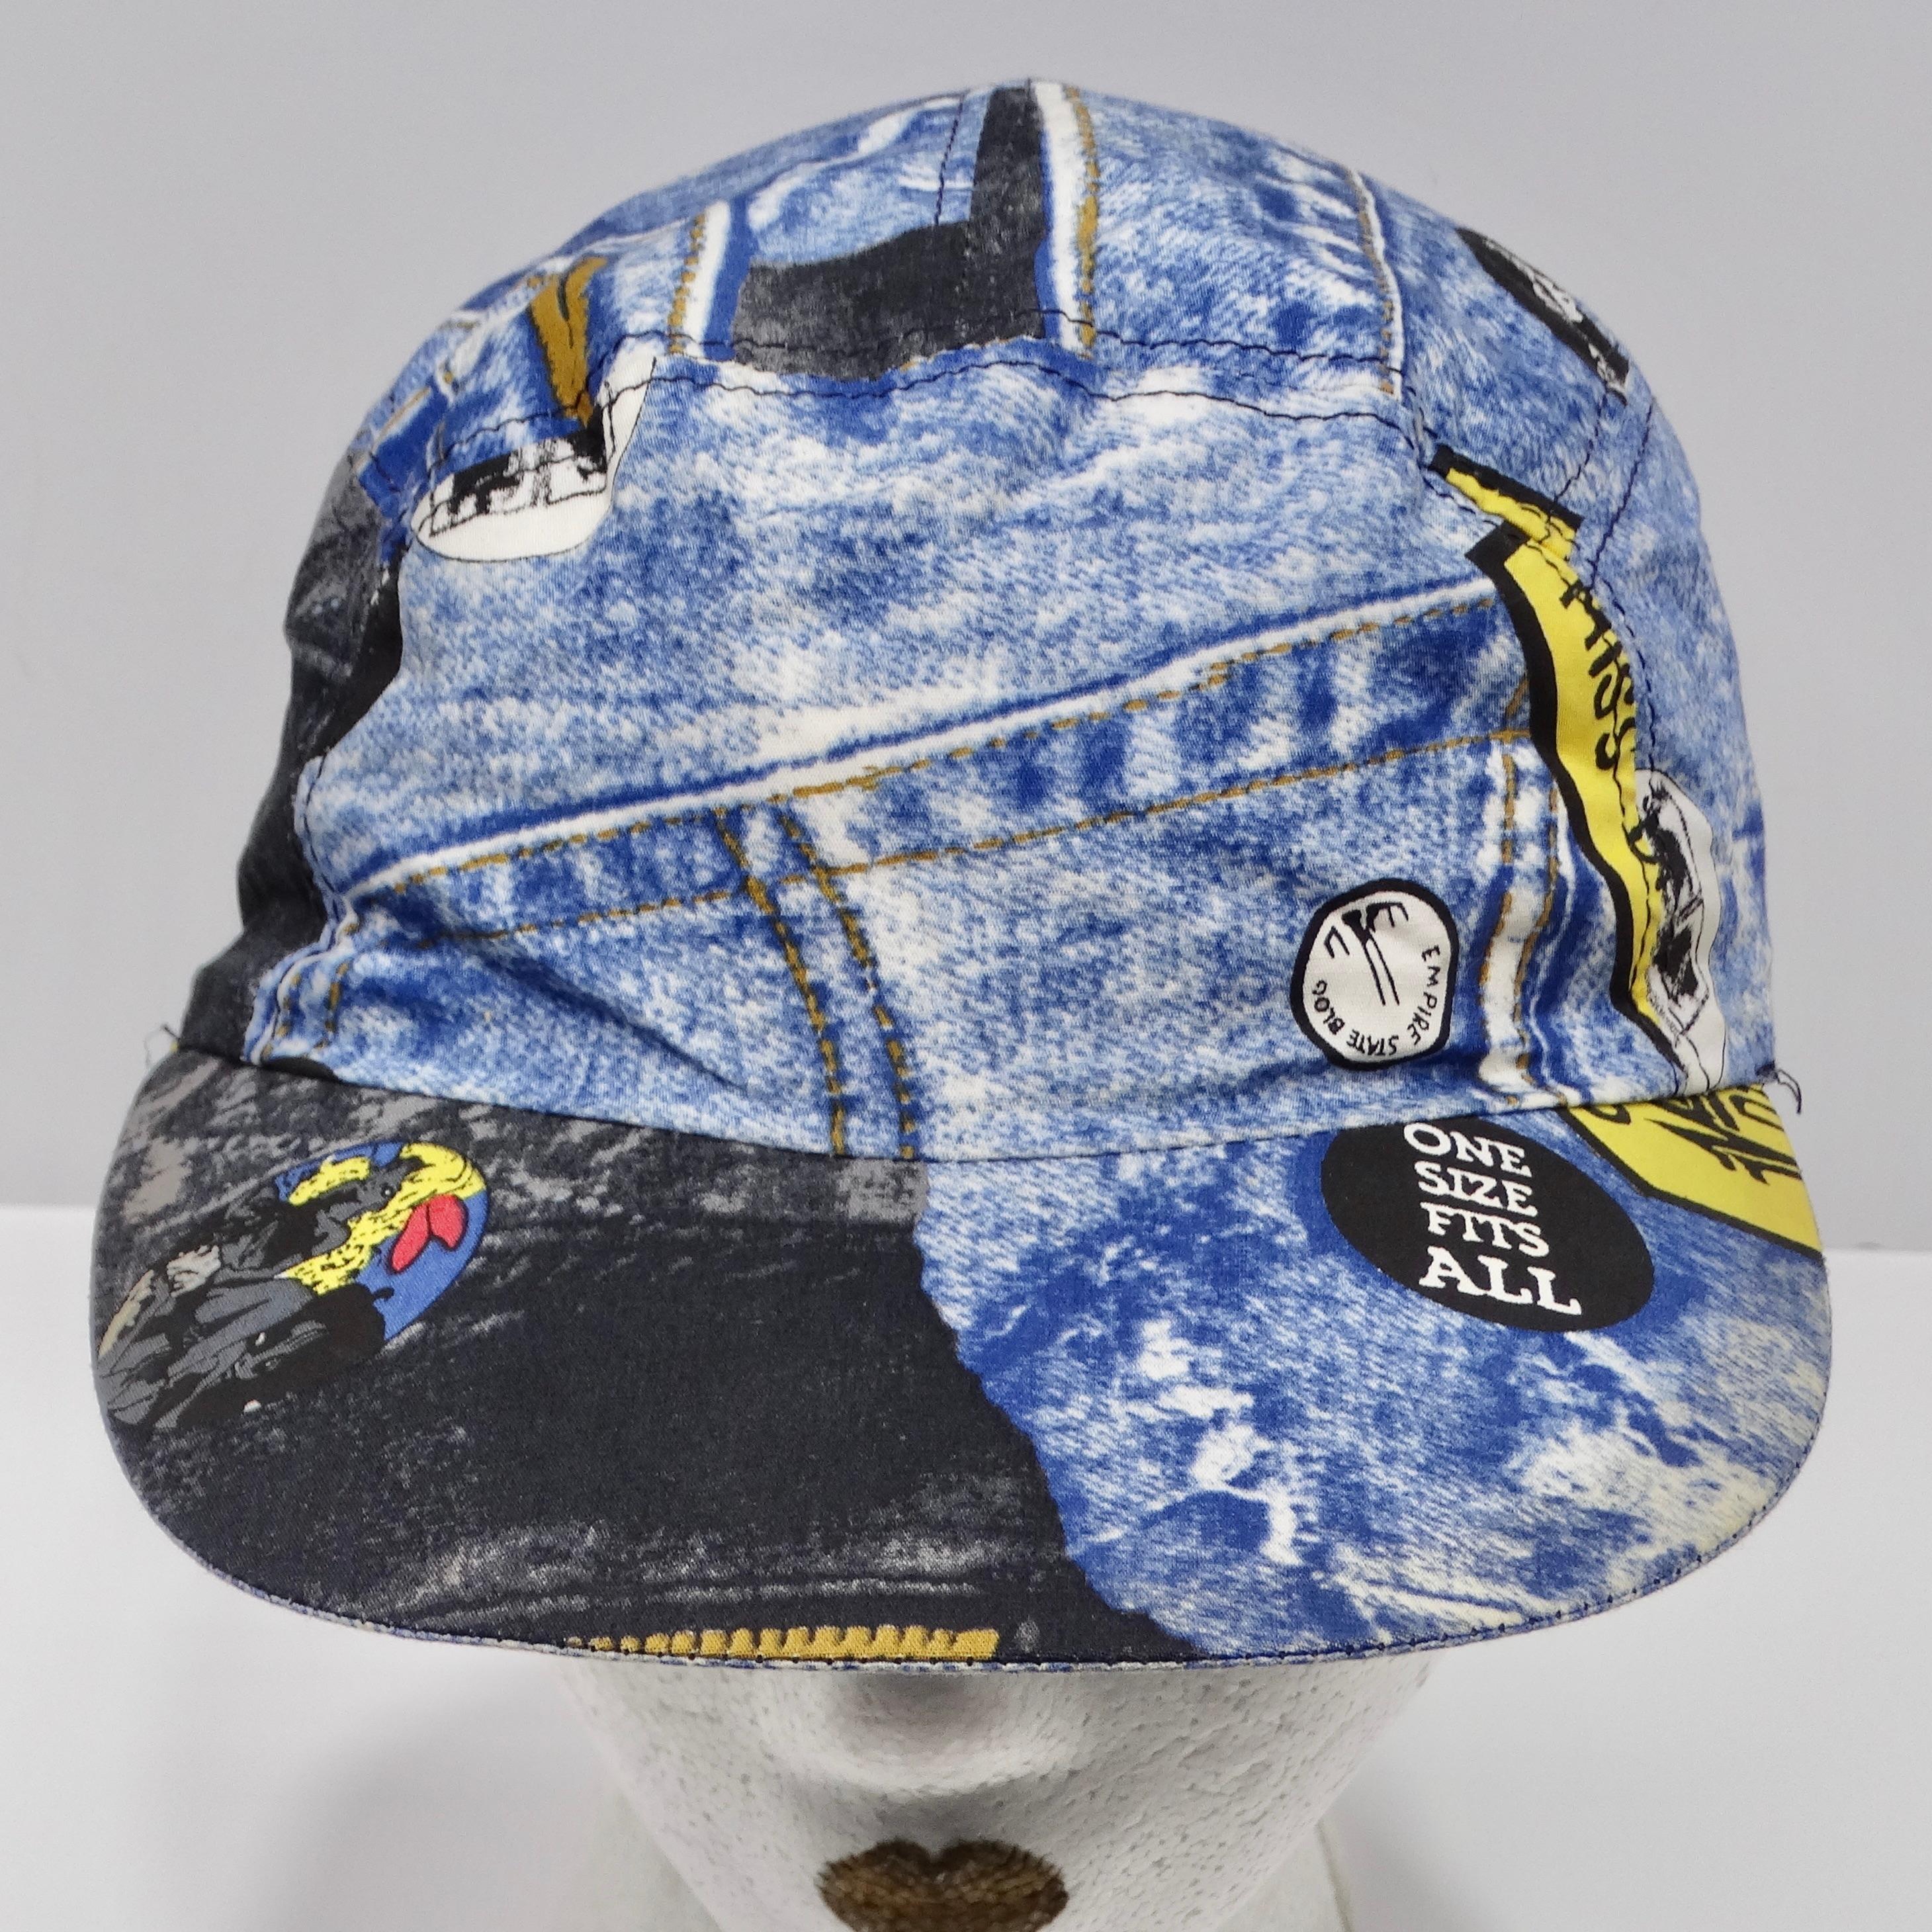 Introducing the Christian Dior FW 2001 Faux Denim Hat, a remarkable creation by John Galliano for Christian Dior that embodies the designer's innovative approach to fashion. This cap-style hat features a faux denim print, a defining motif of